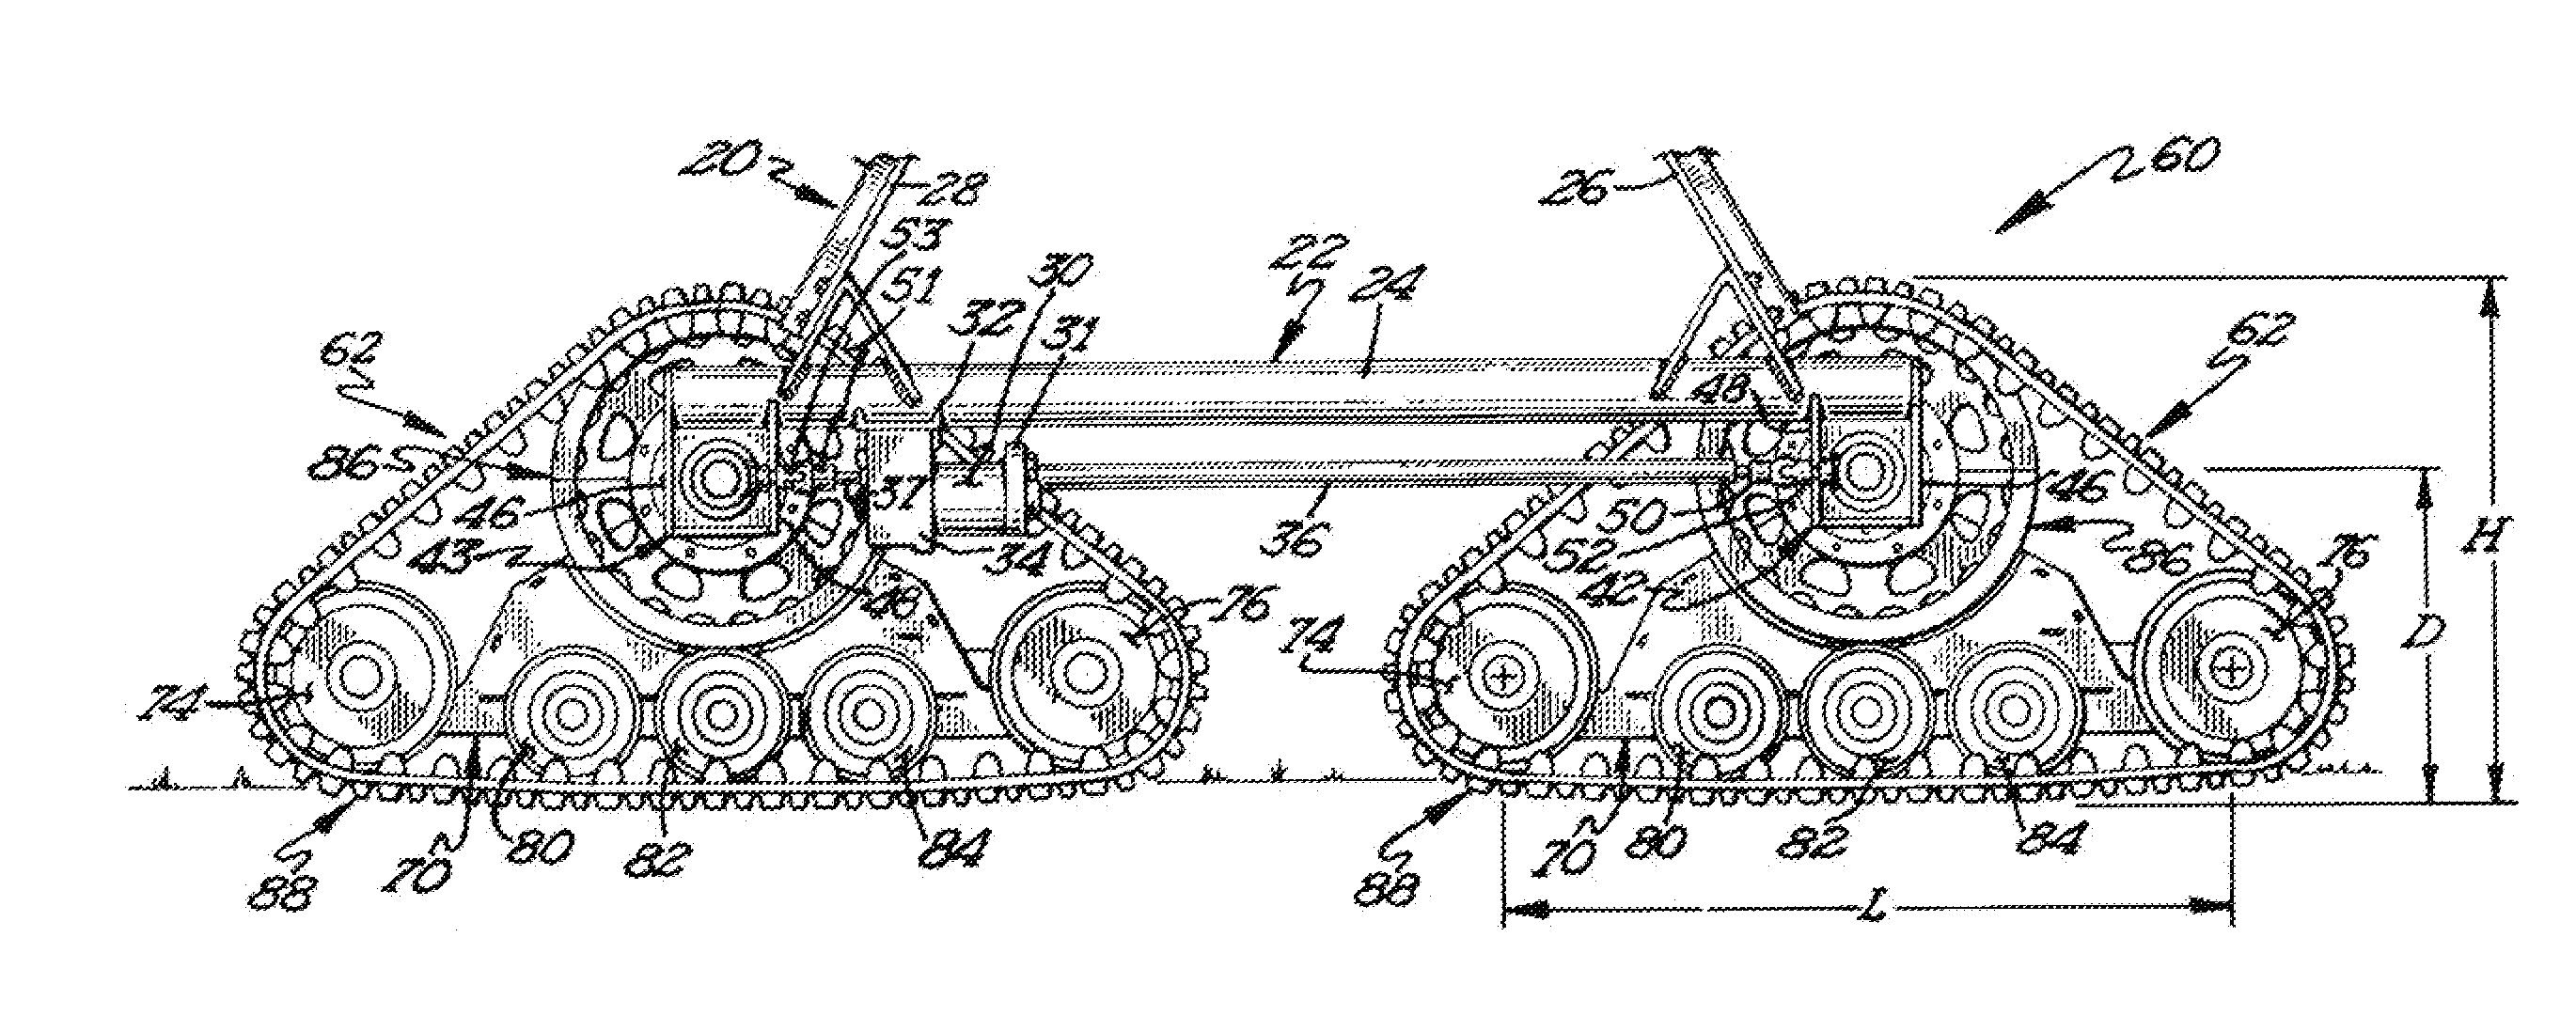 Apparatus for Converting a Wheeled Vehicle to a Tracked Vehicle